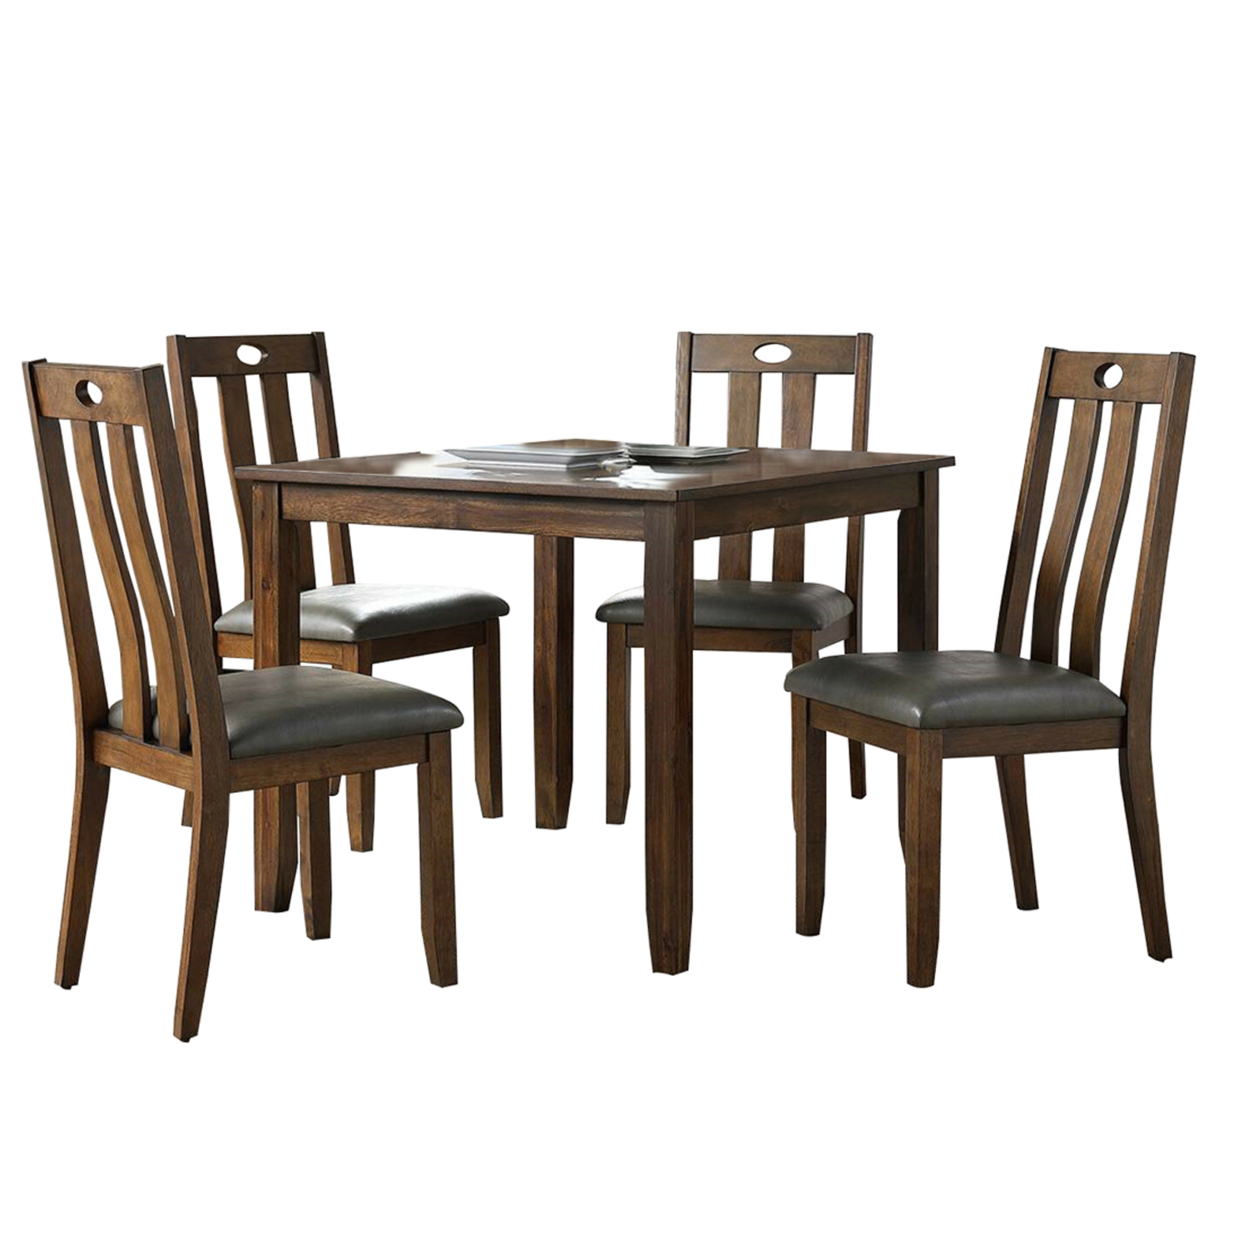 5 Piece Wooden Dining Set With Padded Seat Chair, Brown And Gray- Saltoro Sherpi